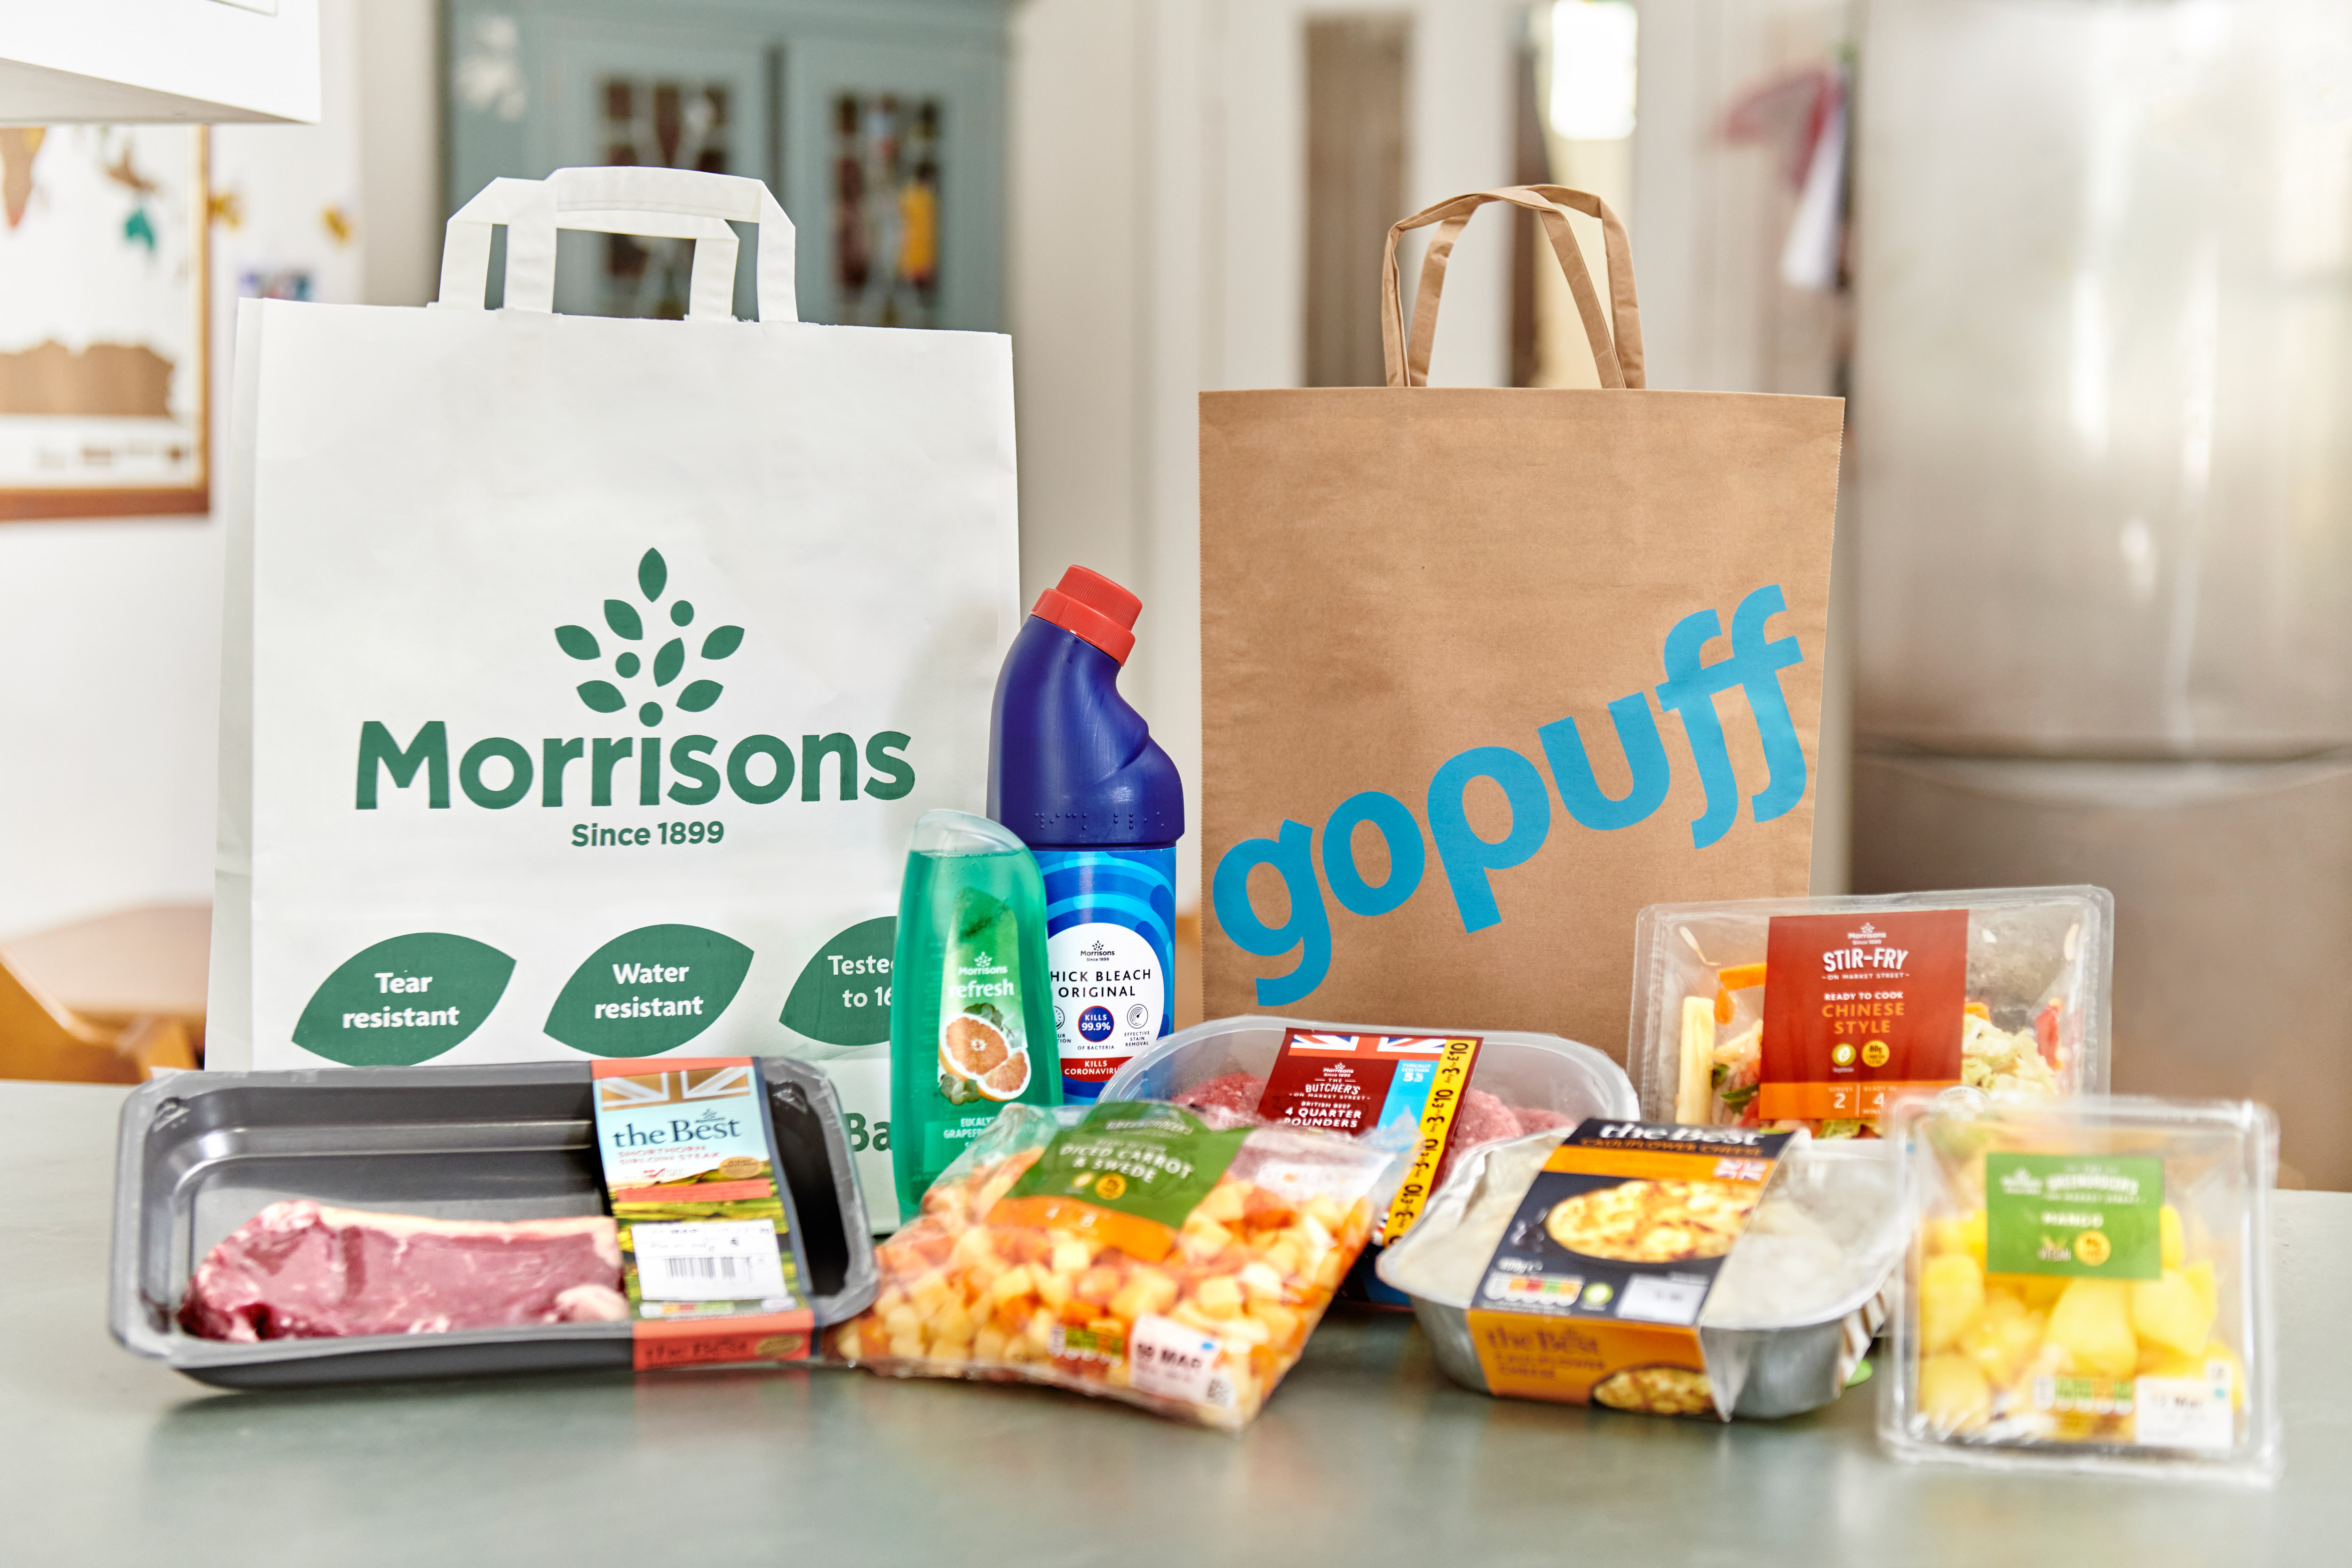 Gopuff and Morrisons launch partnership to bring instant delivery of thousands of high-quality products to UK customers